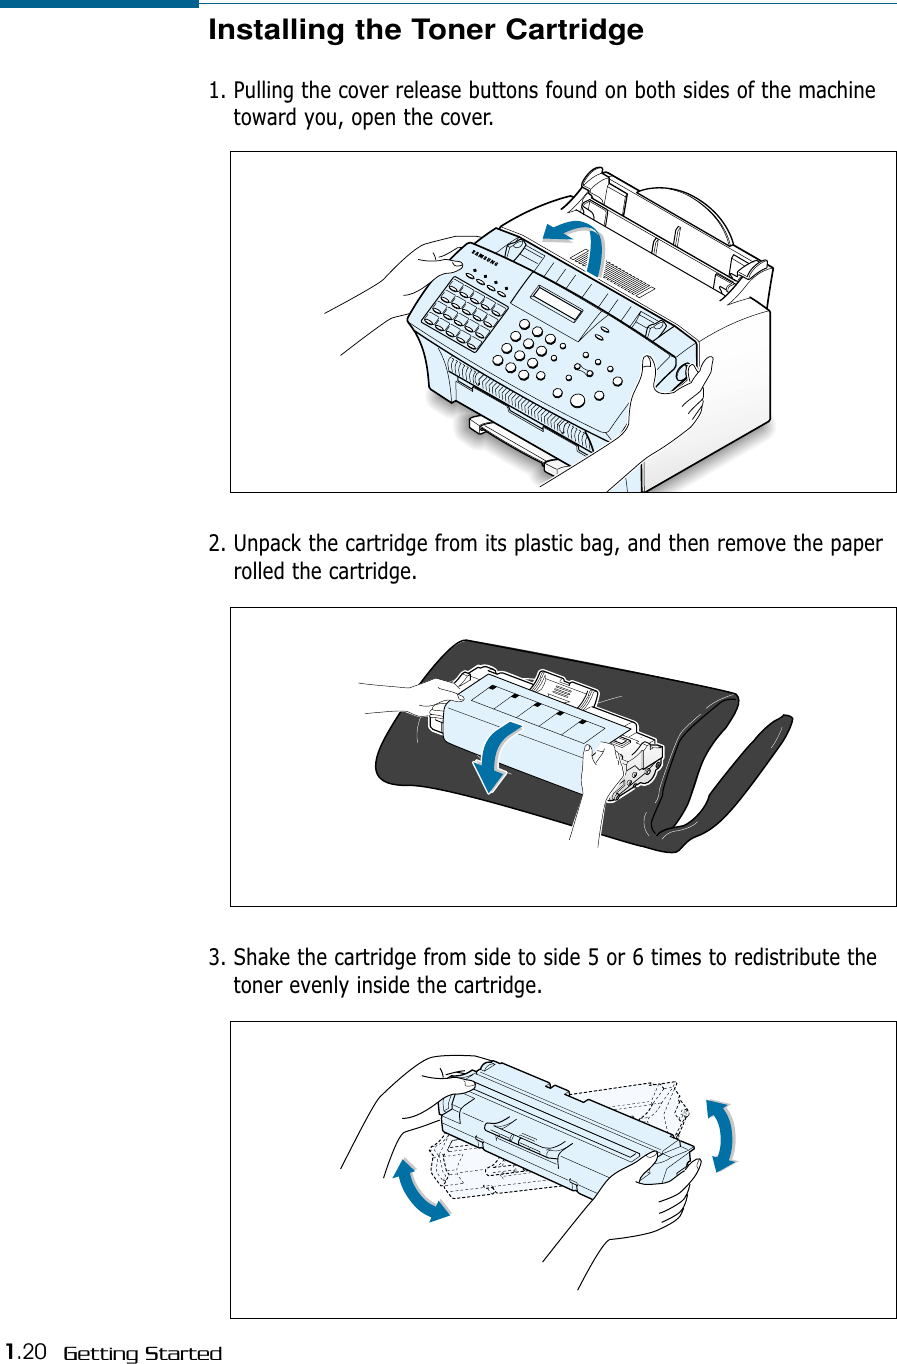 1.20 Getting StartedInstalling the Toner Cartridge1. Pulling the cover release buttons found on both sides of the machinetoward you, open the cover.2. Unpack the cartridge from its plastic bag, and then remove the paperrolled the cartridge. 3. Shake the cartridge from side to side 5 or 6 times to redistribute thetoner evenly inside the cartridge.